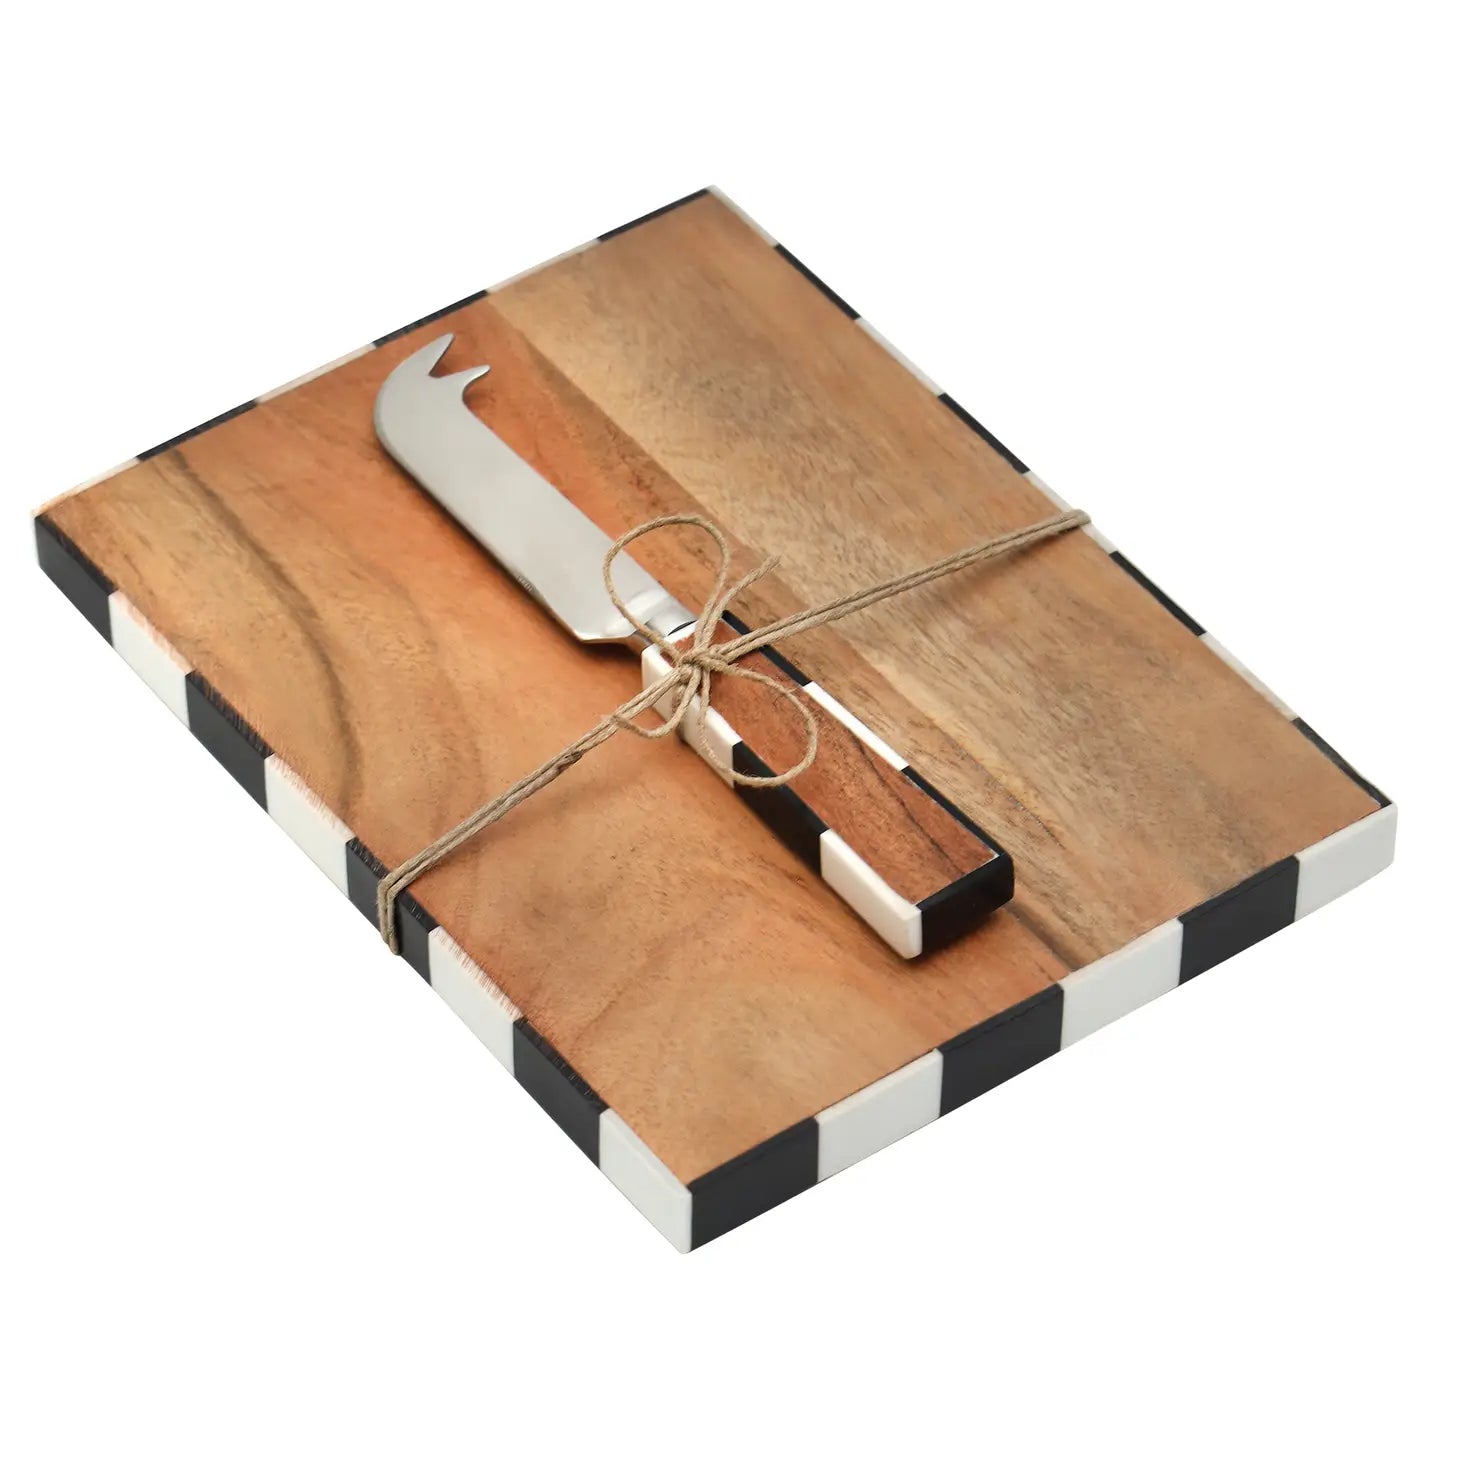 Chenonceau Checkerboard Cheese Board With Knife